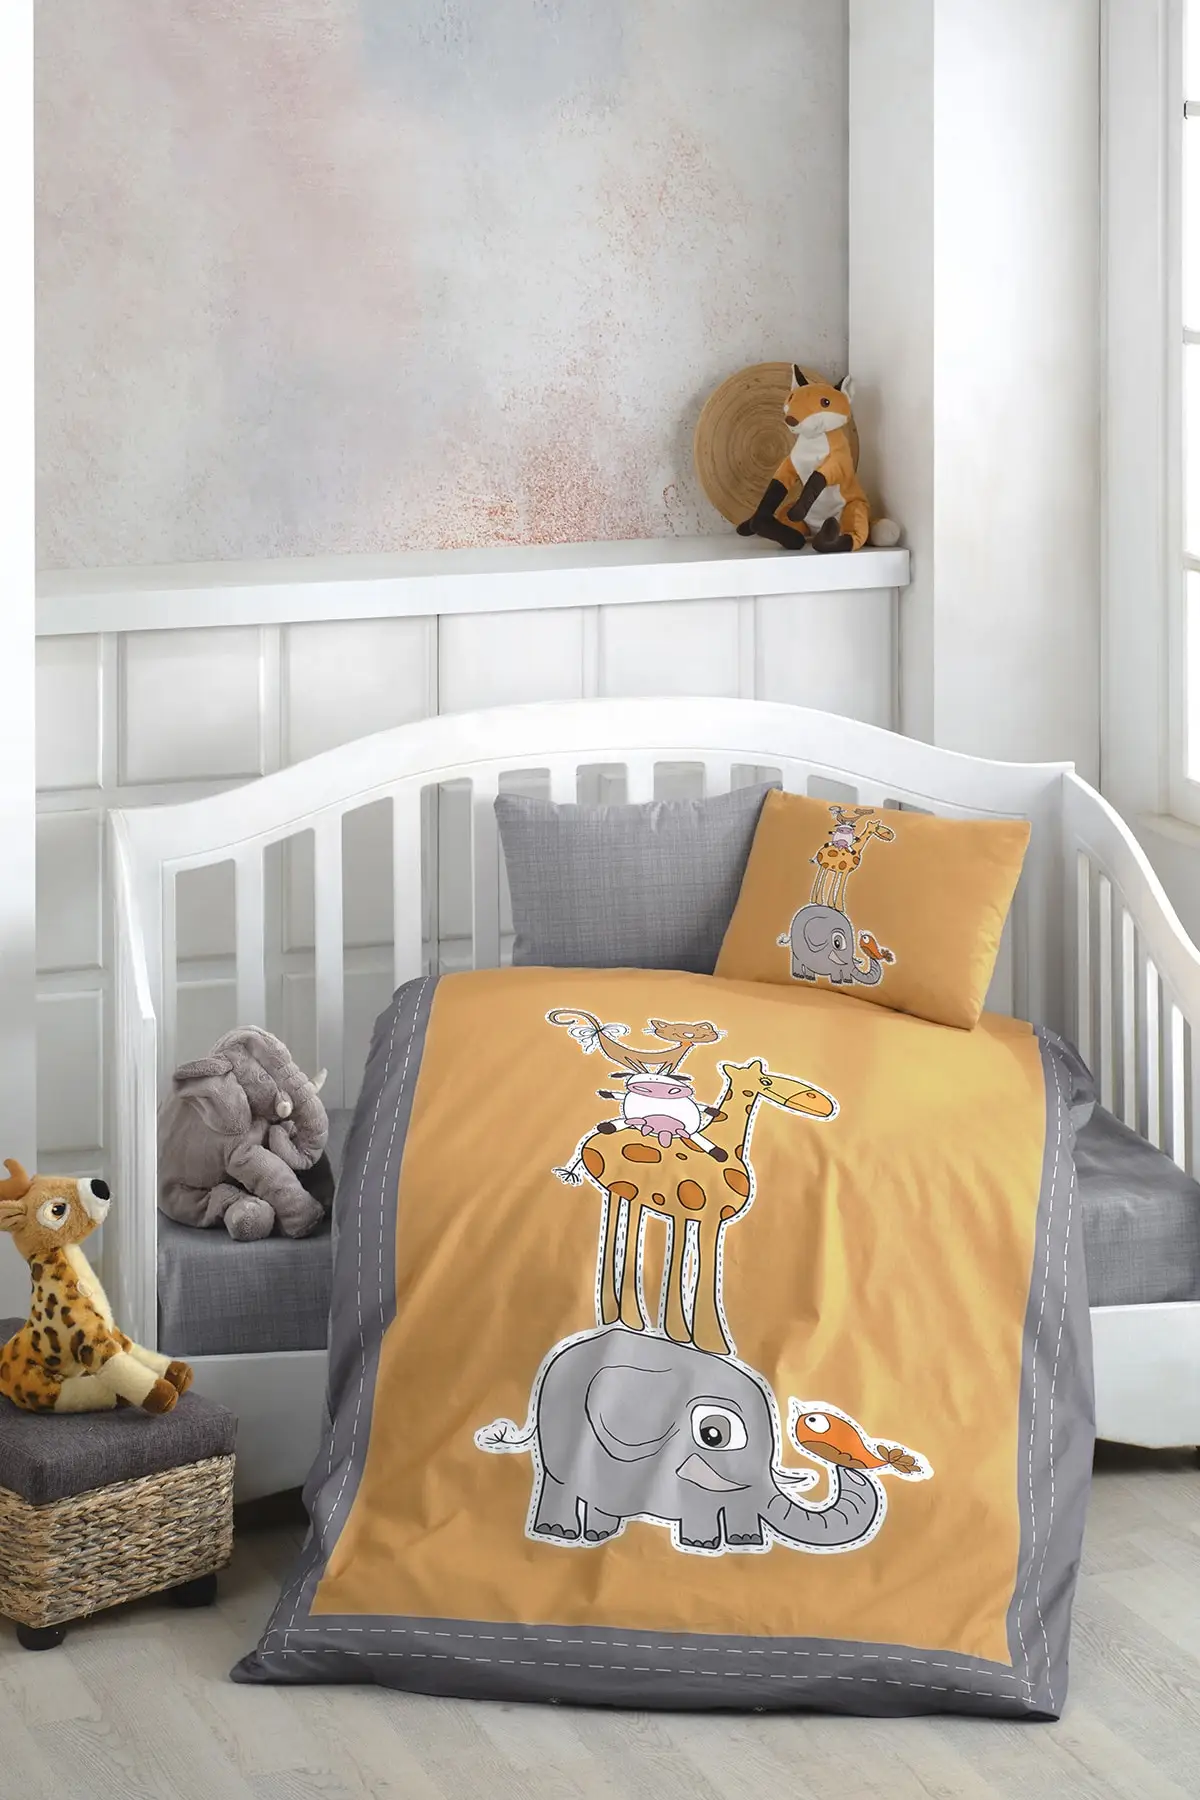 baby-bedding-set-digital-printed-3d-cotton-sheets-pillow-case-slip-cover-soft-mother-child